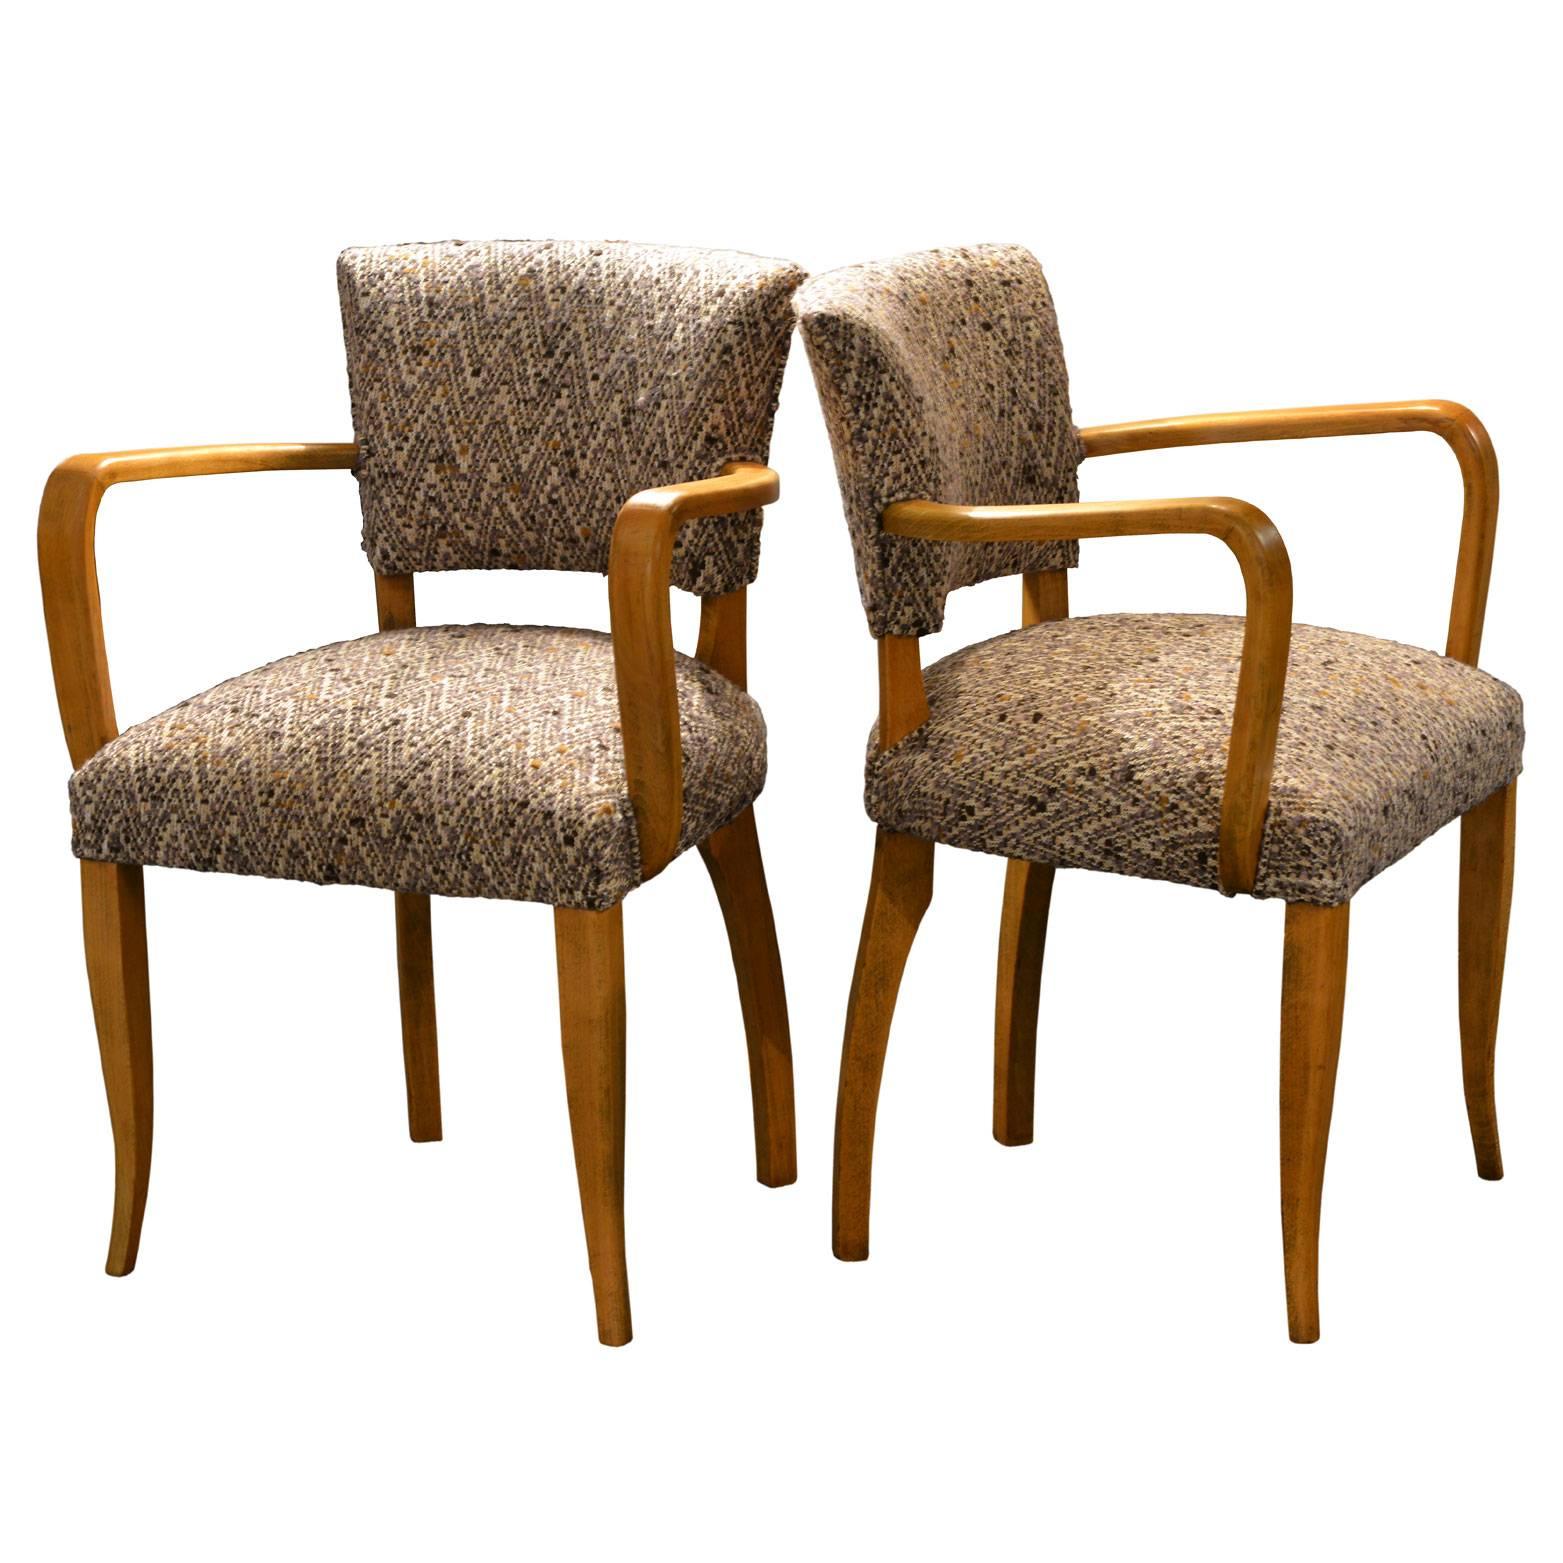 Pair of Bridge Chairs, Italy, Early 1950s For Sale